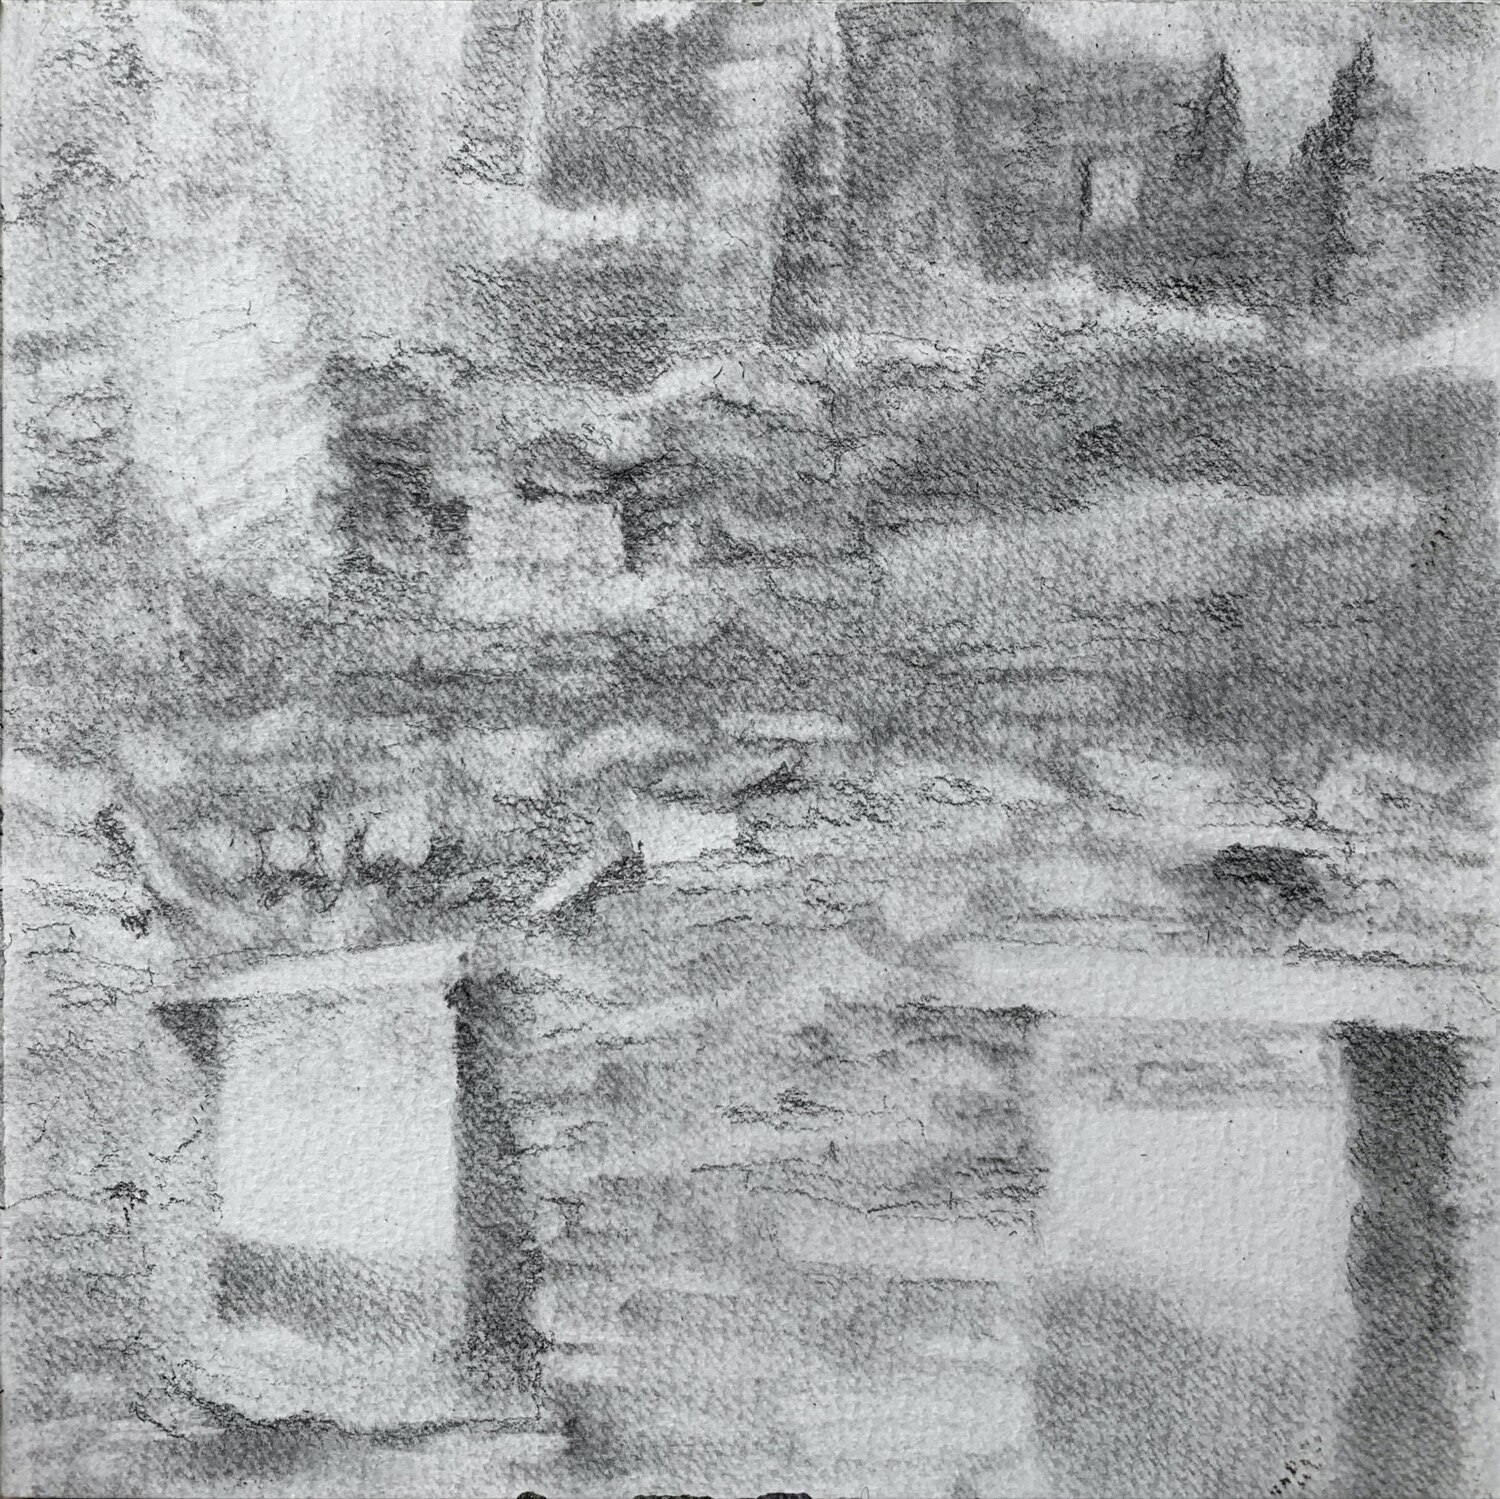   Cill Rialaig,  2019 graphite on paper, 8 x 8 in 